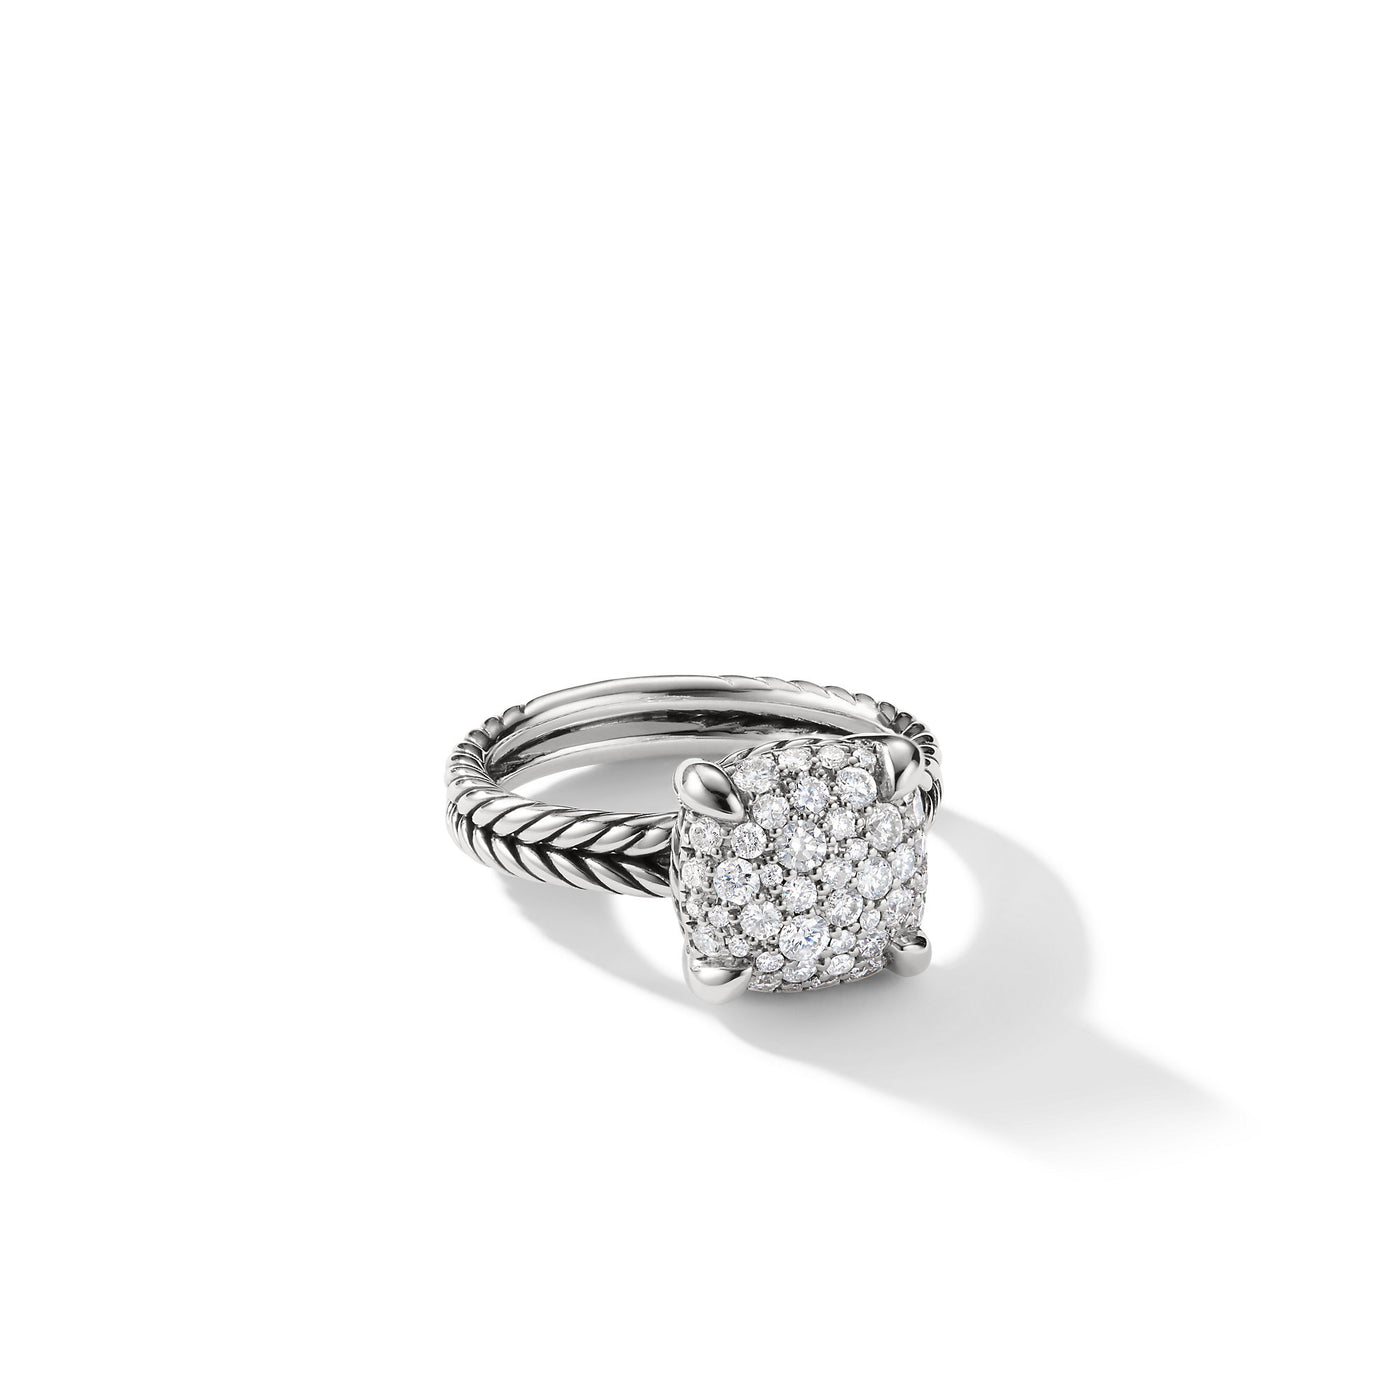 Chatelaine® Ring in Sterling Silver with Pavé Diamonds, 11mm